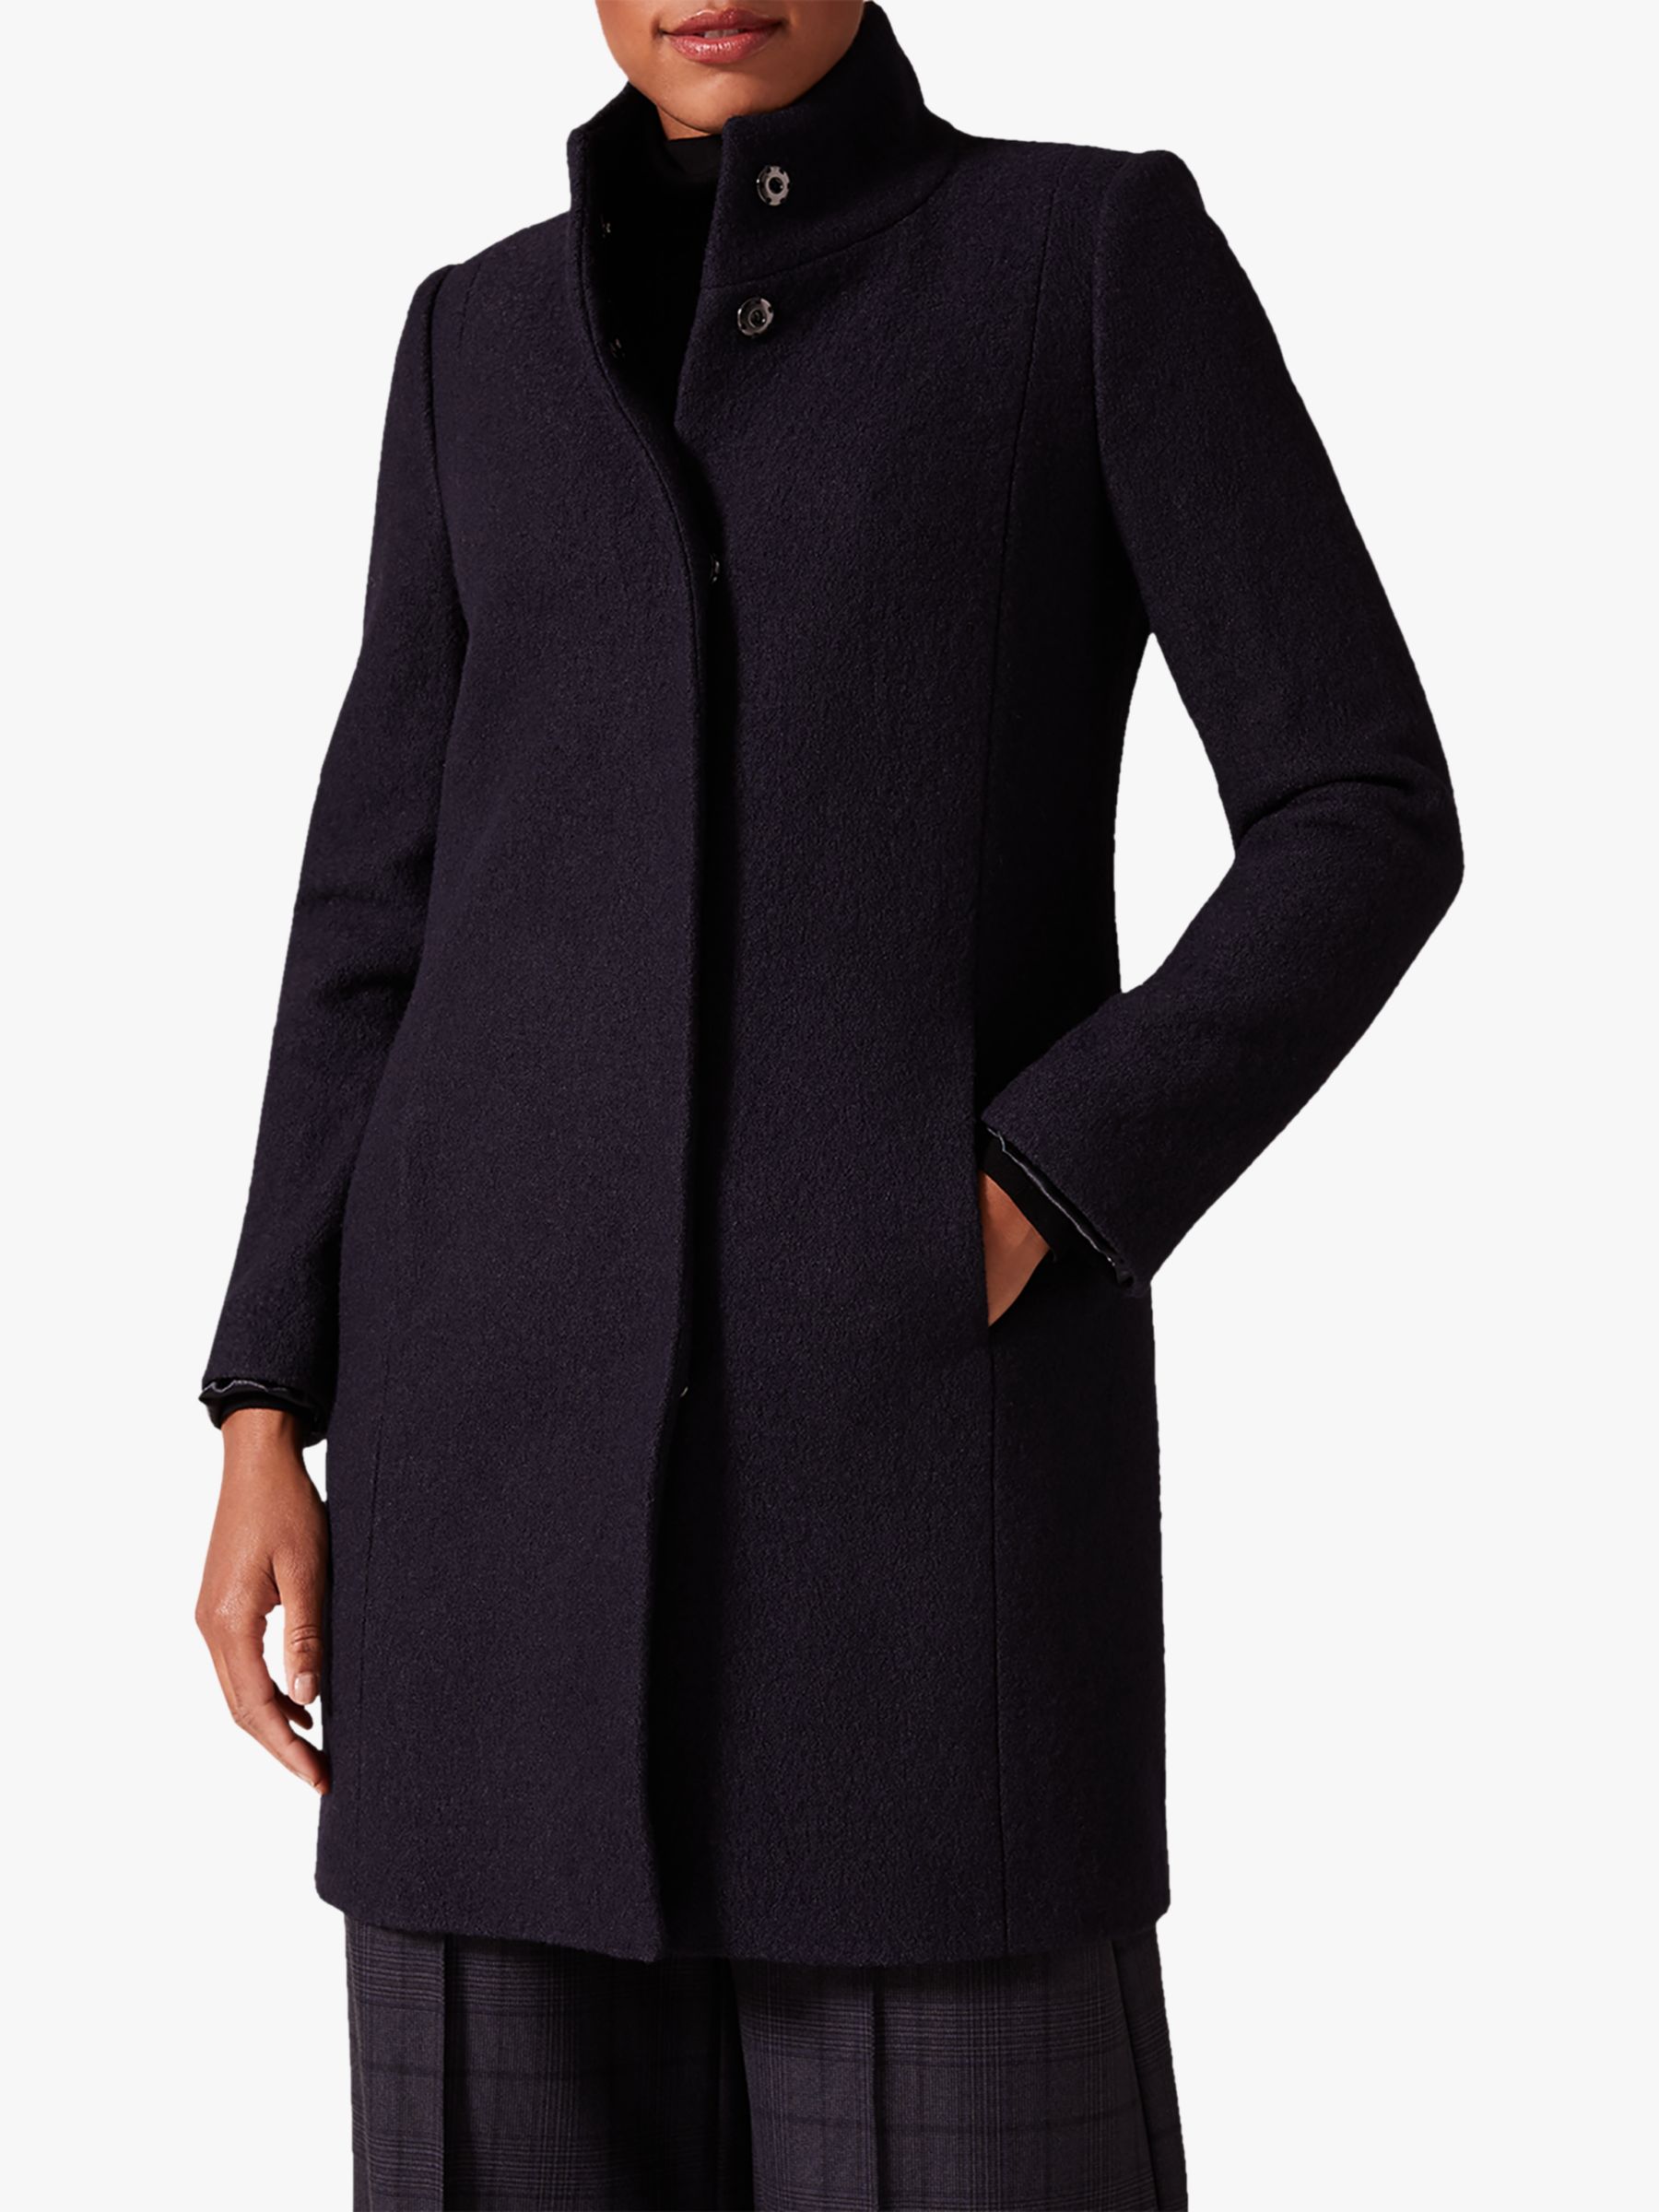 Phase Eight Bailie Wool Funnel Neck Coat at John Lewis & Partners